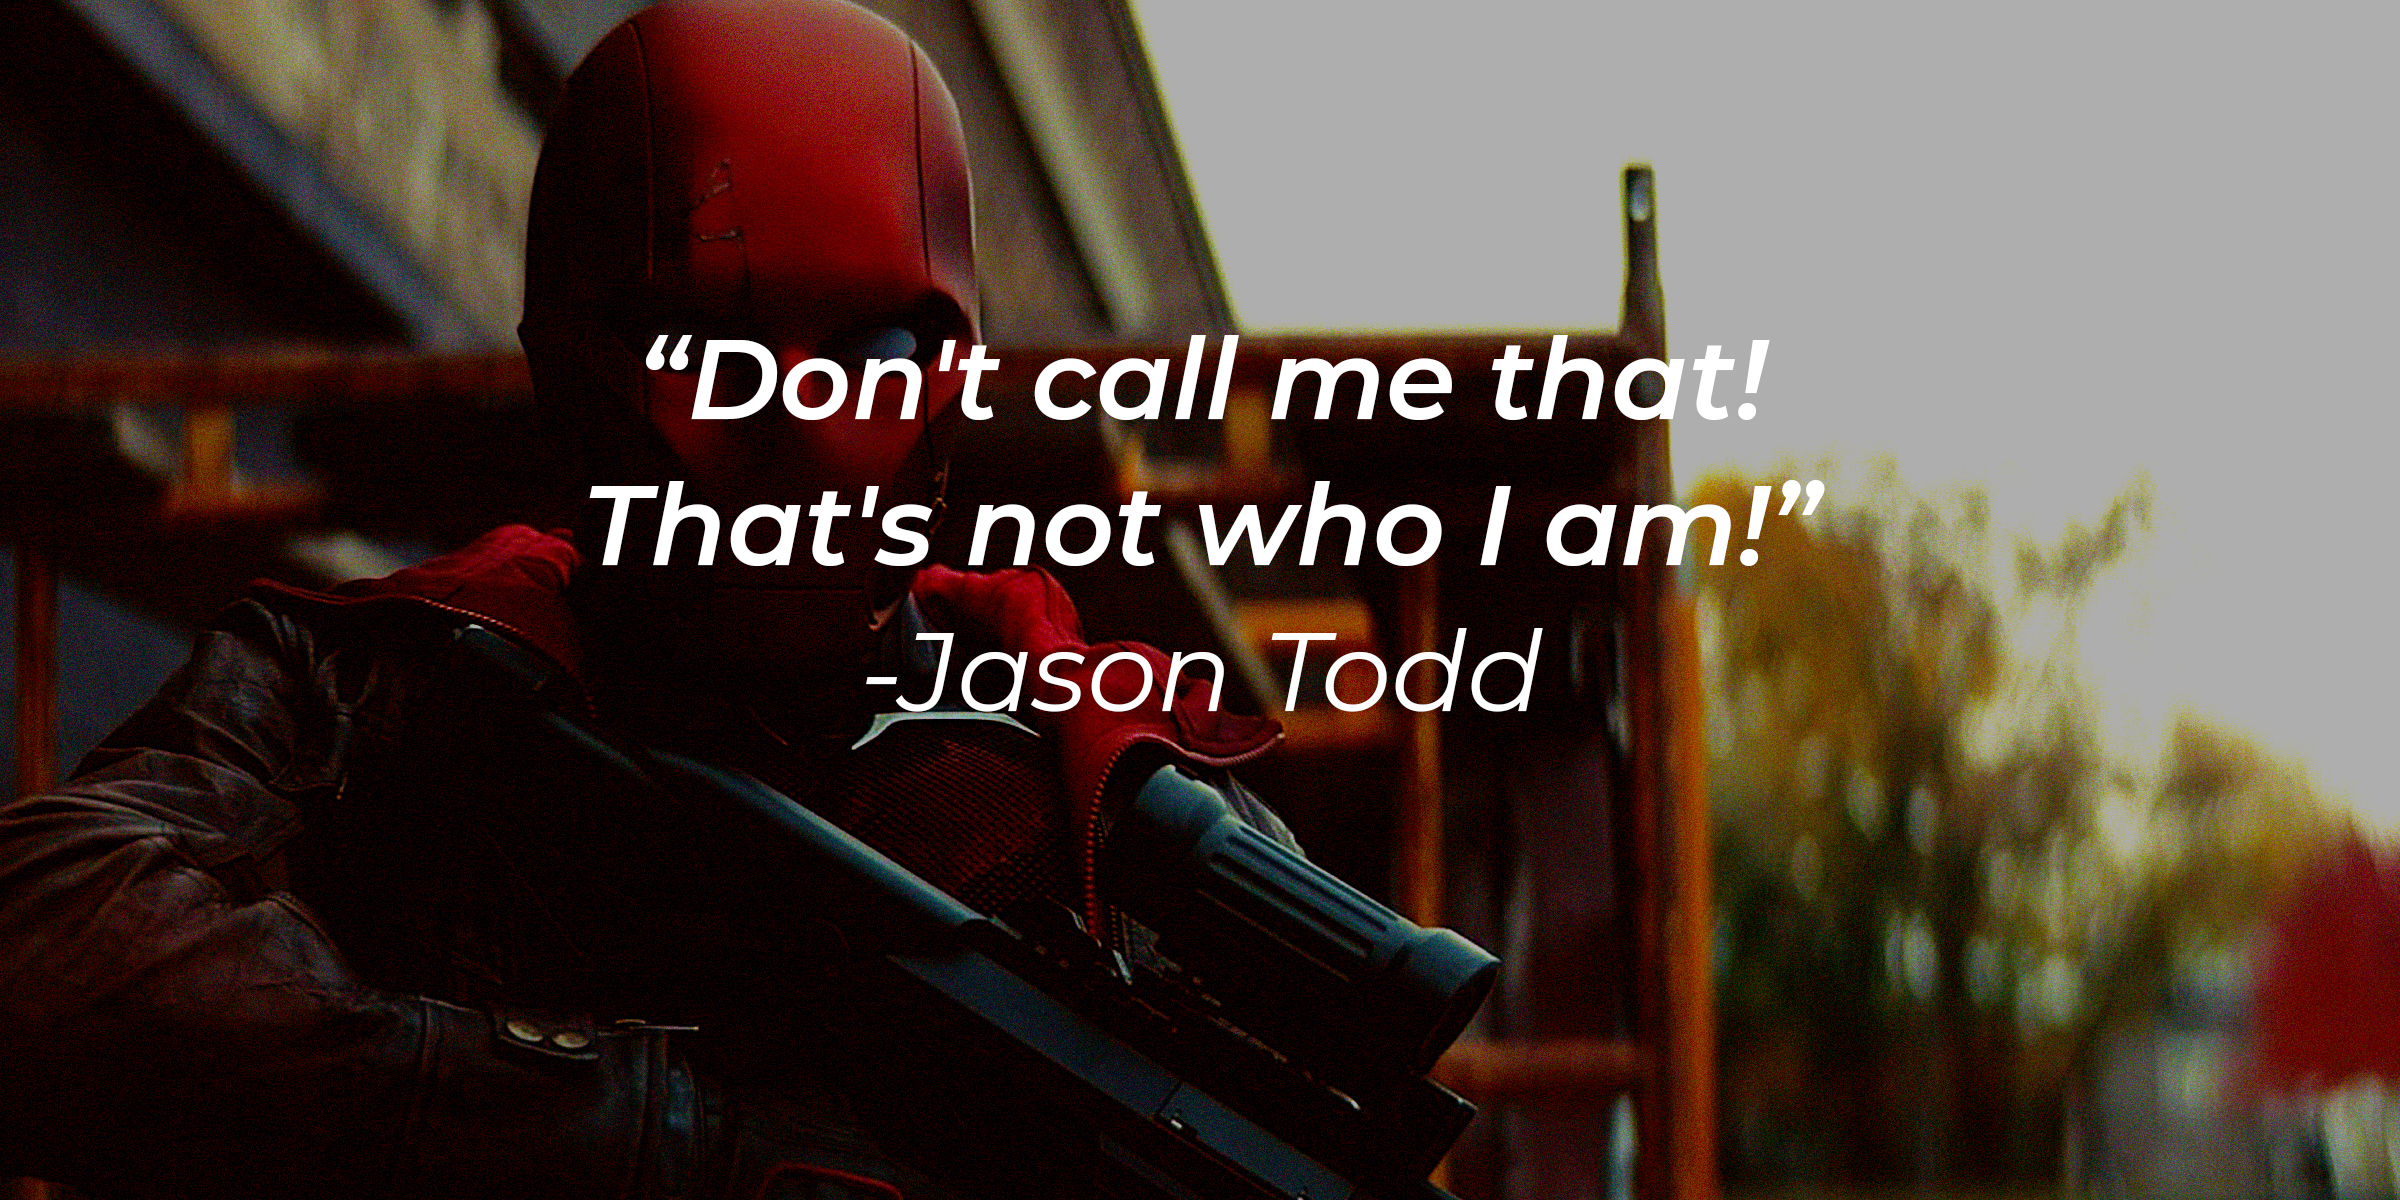 A photo of Jason Todd with the quote, "Don't call me that! That's not who I am!" | Source: facebook.com/titansdc